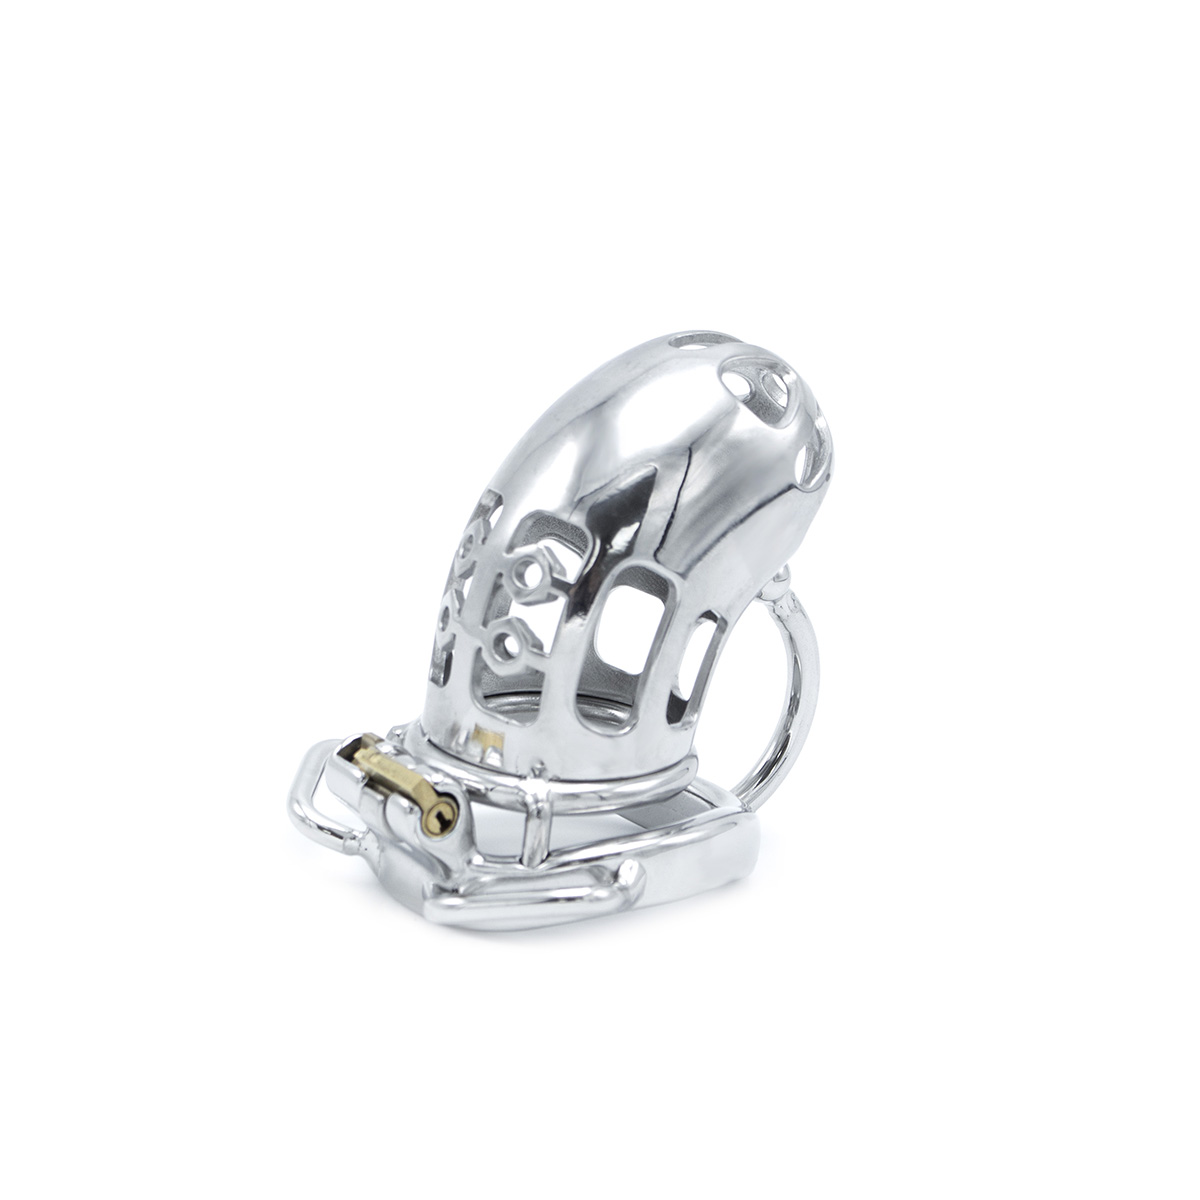 Belted-Chastity-Device-with-Ball-Divider-OPR-278014-6